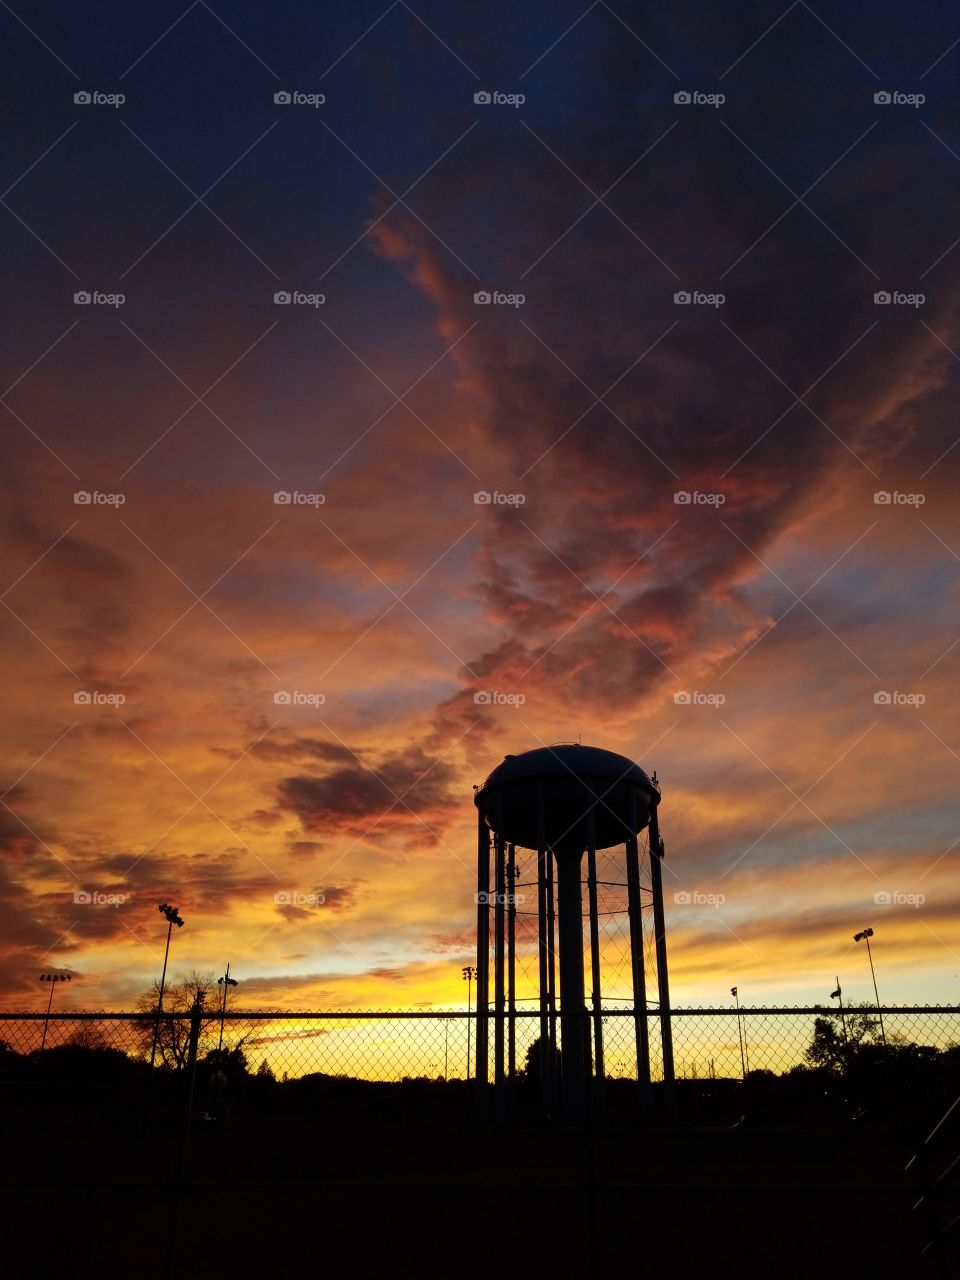 Water tower during sunset